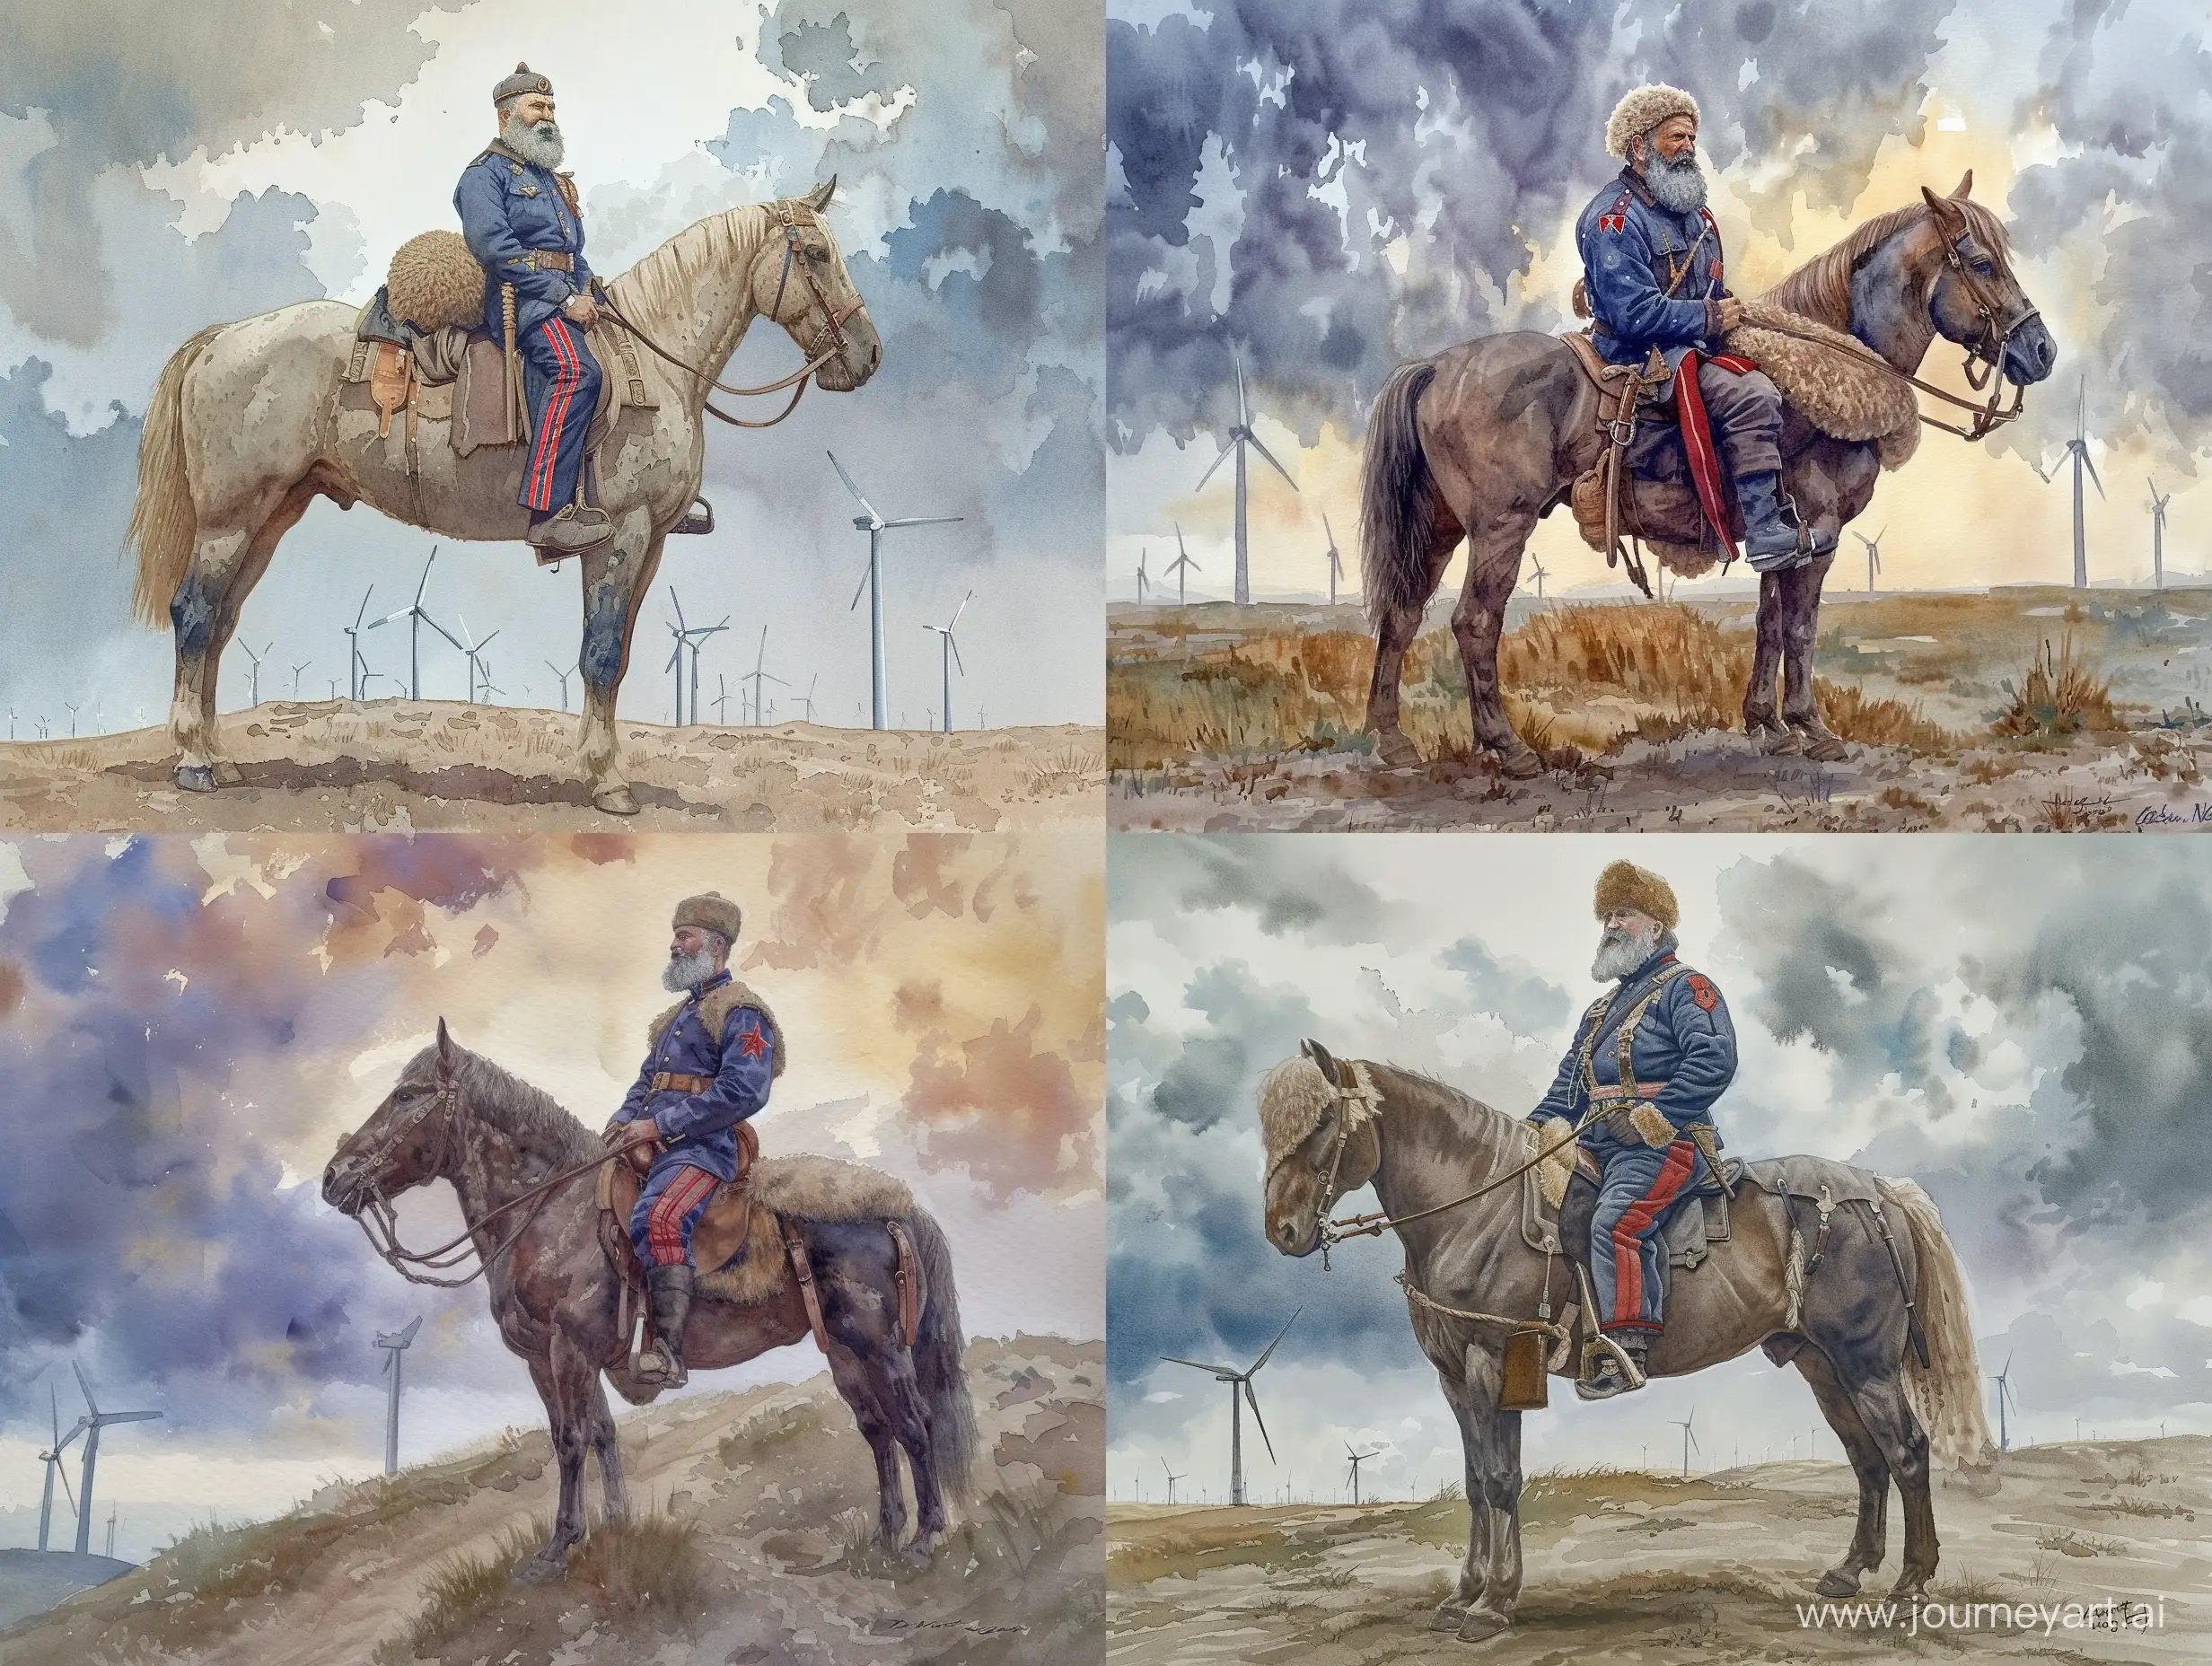 a rider with a gray beard and mustache sits on a horse, in the foreground, the horse stands in profile, the rider is dressed in dark trousers with red stripes, a sheepskin hat, a blue Cossack military uniform, against a cloudy sky and wind turbines, in the background, watercolor, watercolor paper, Victor Ngai style